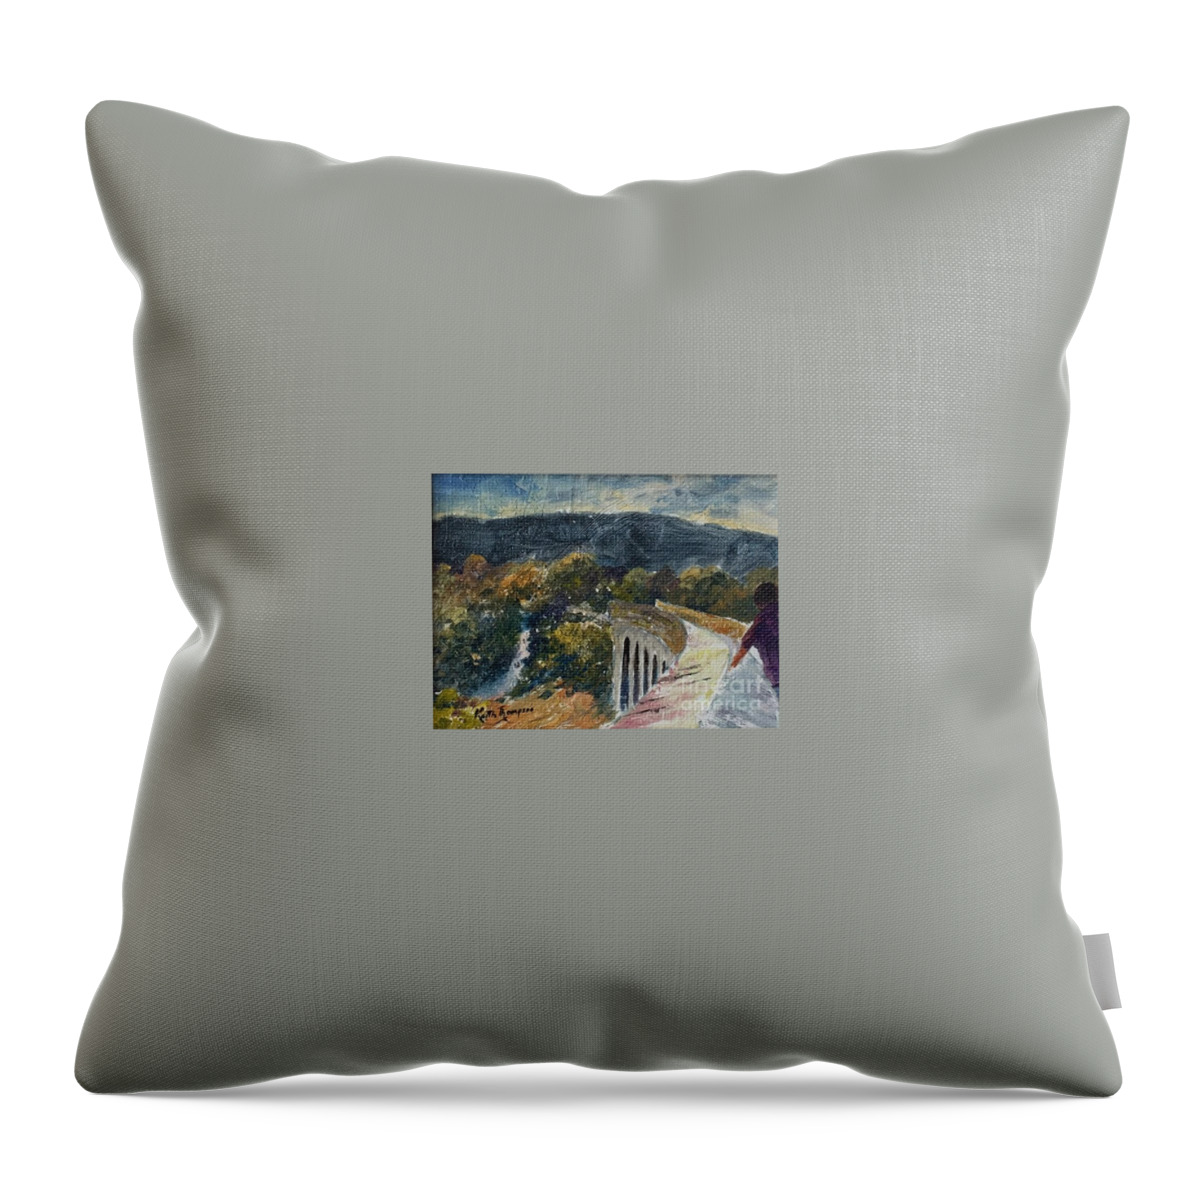 Waterford Greenway Throw Pillow featuring the painting The Greenway Viaduct at Kilmacthomas, County Waterford by Keith Thompson